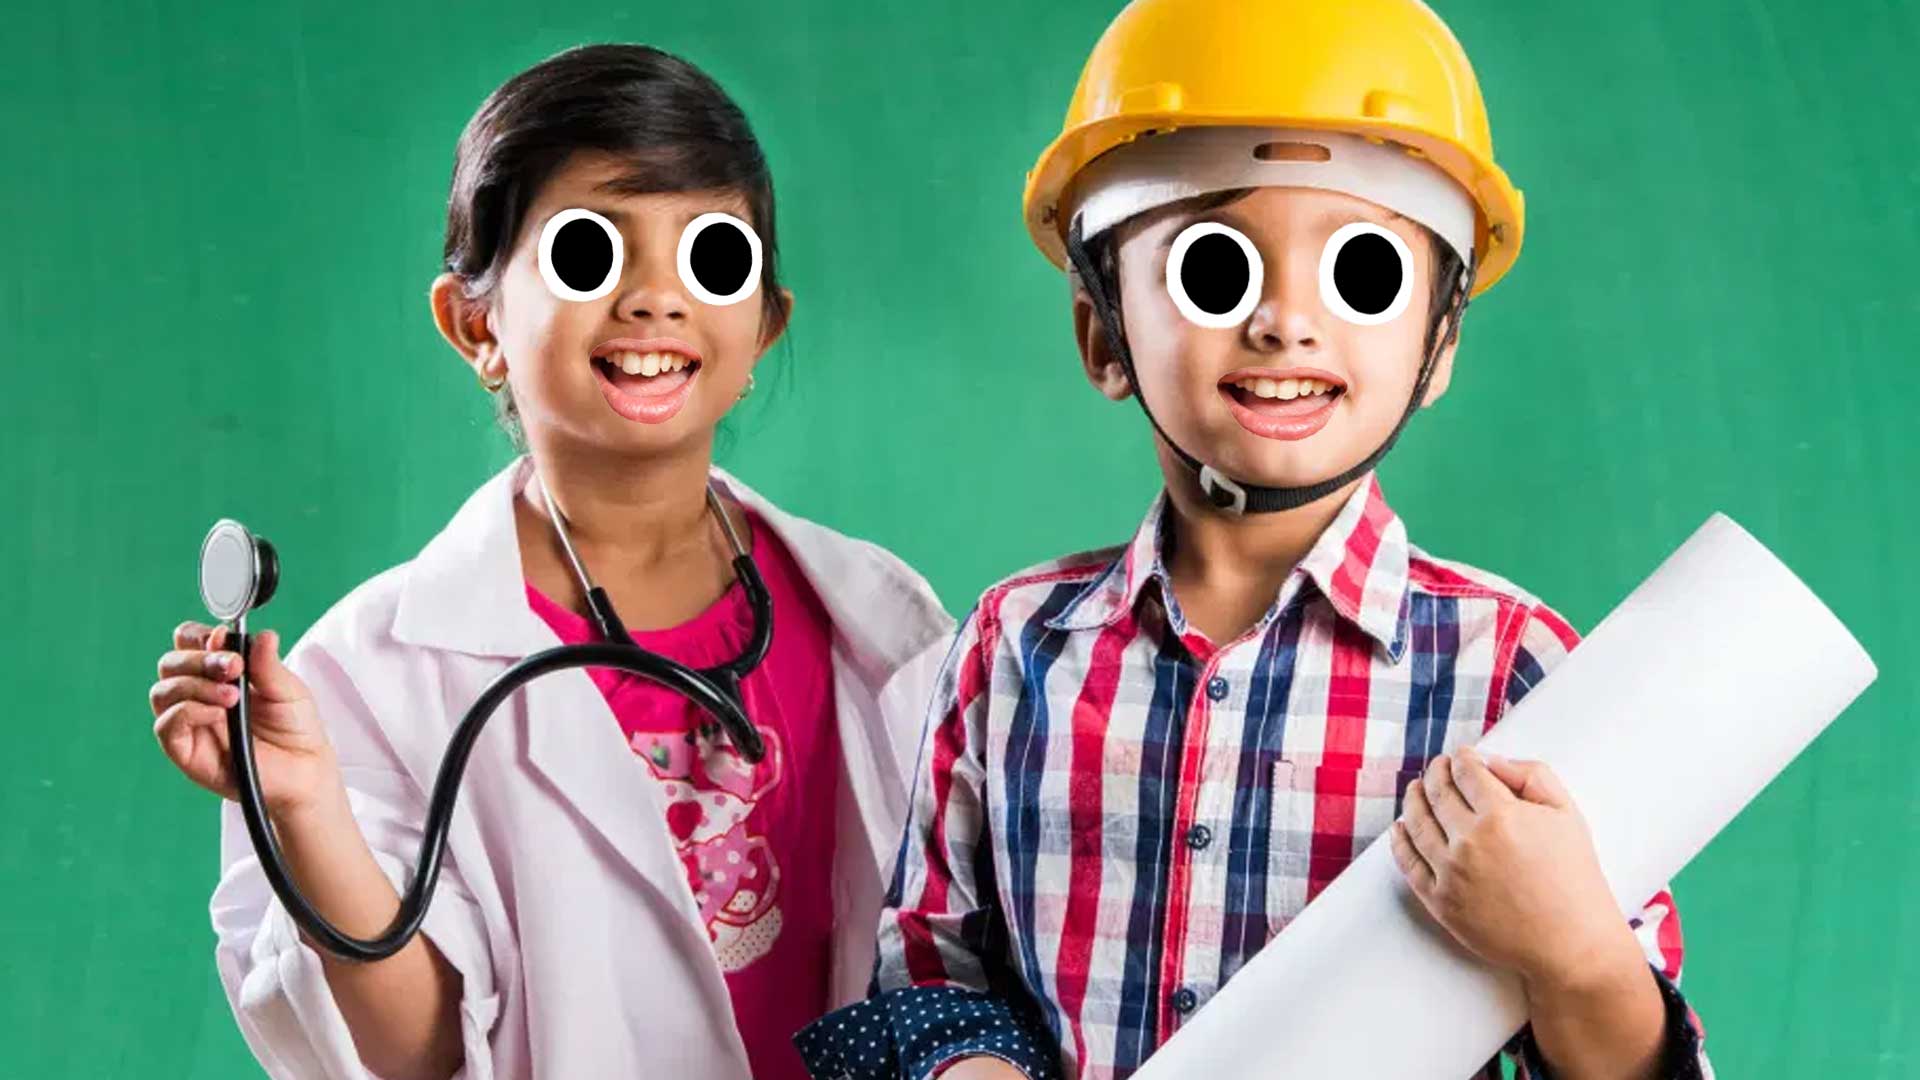 Two children, dressed as a doctor and construction worker